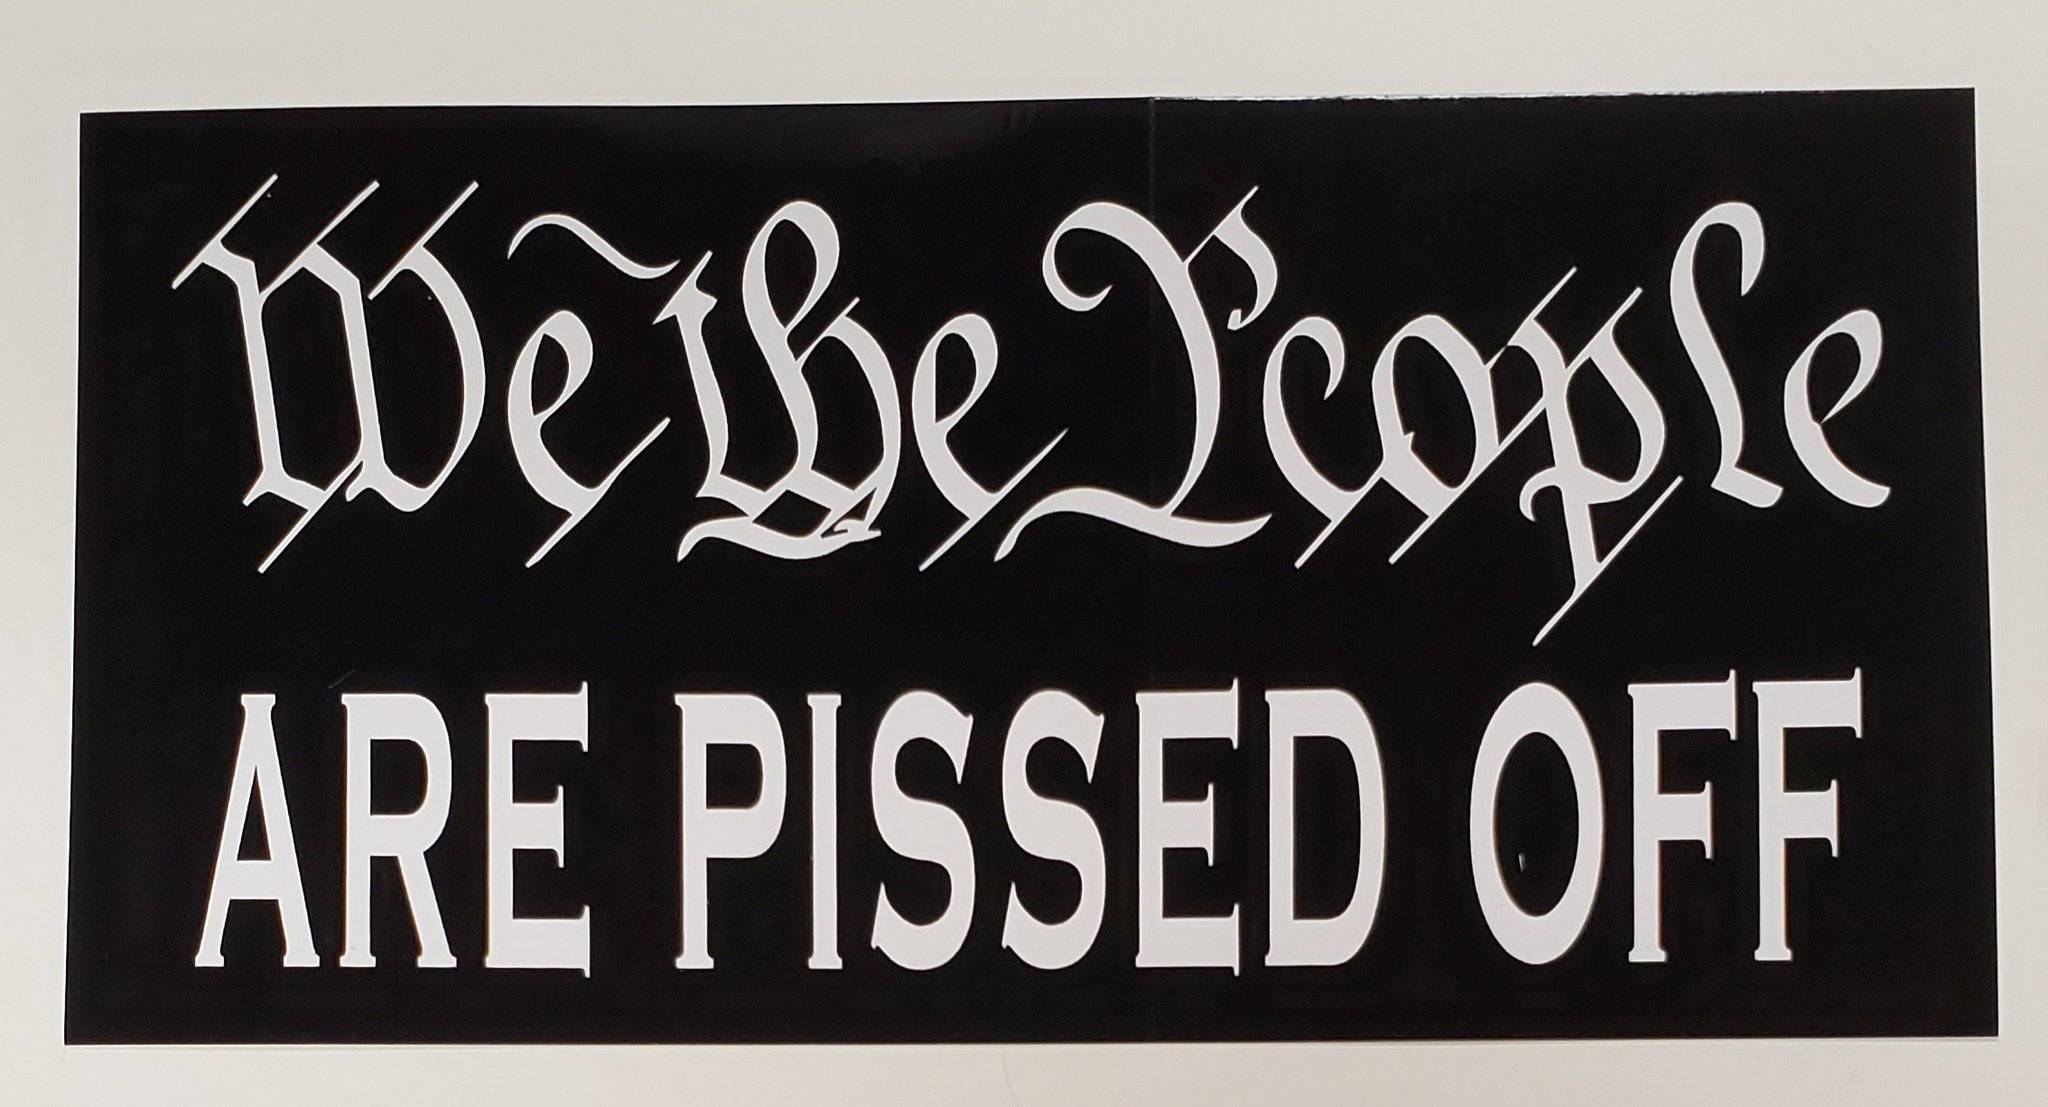 We The People Are Pissed Off Bumper Sticker.